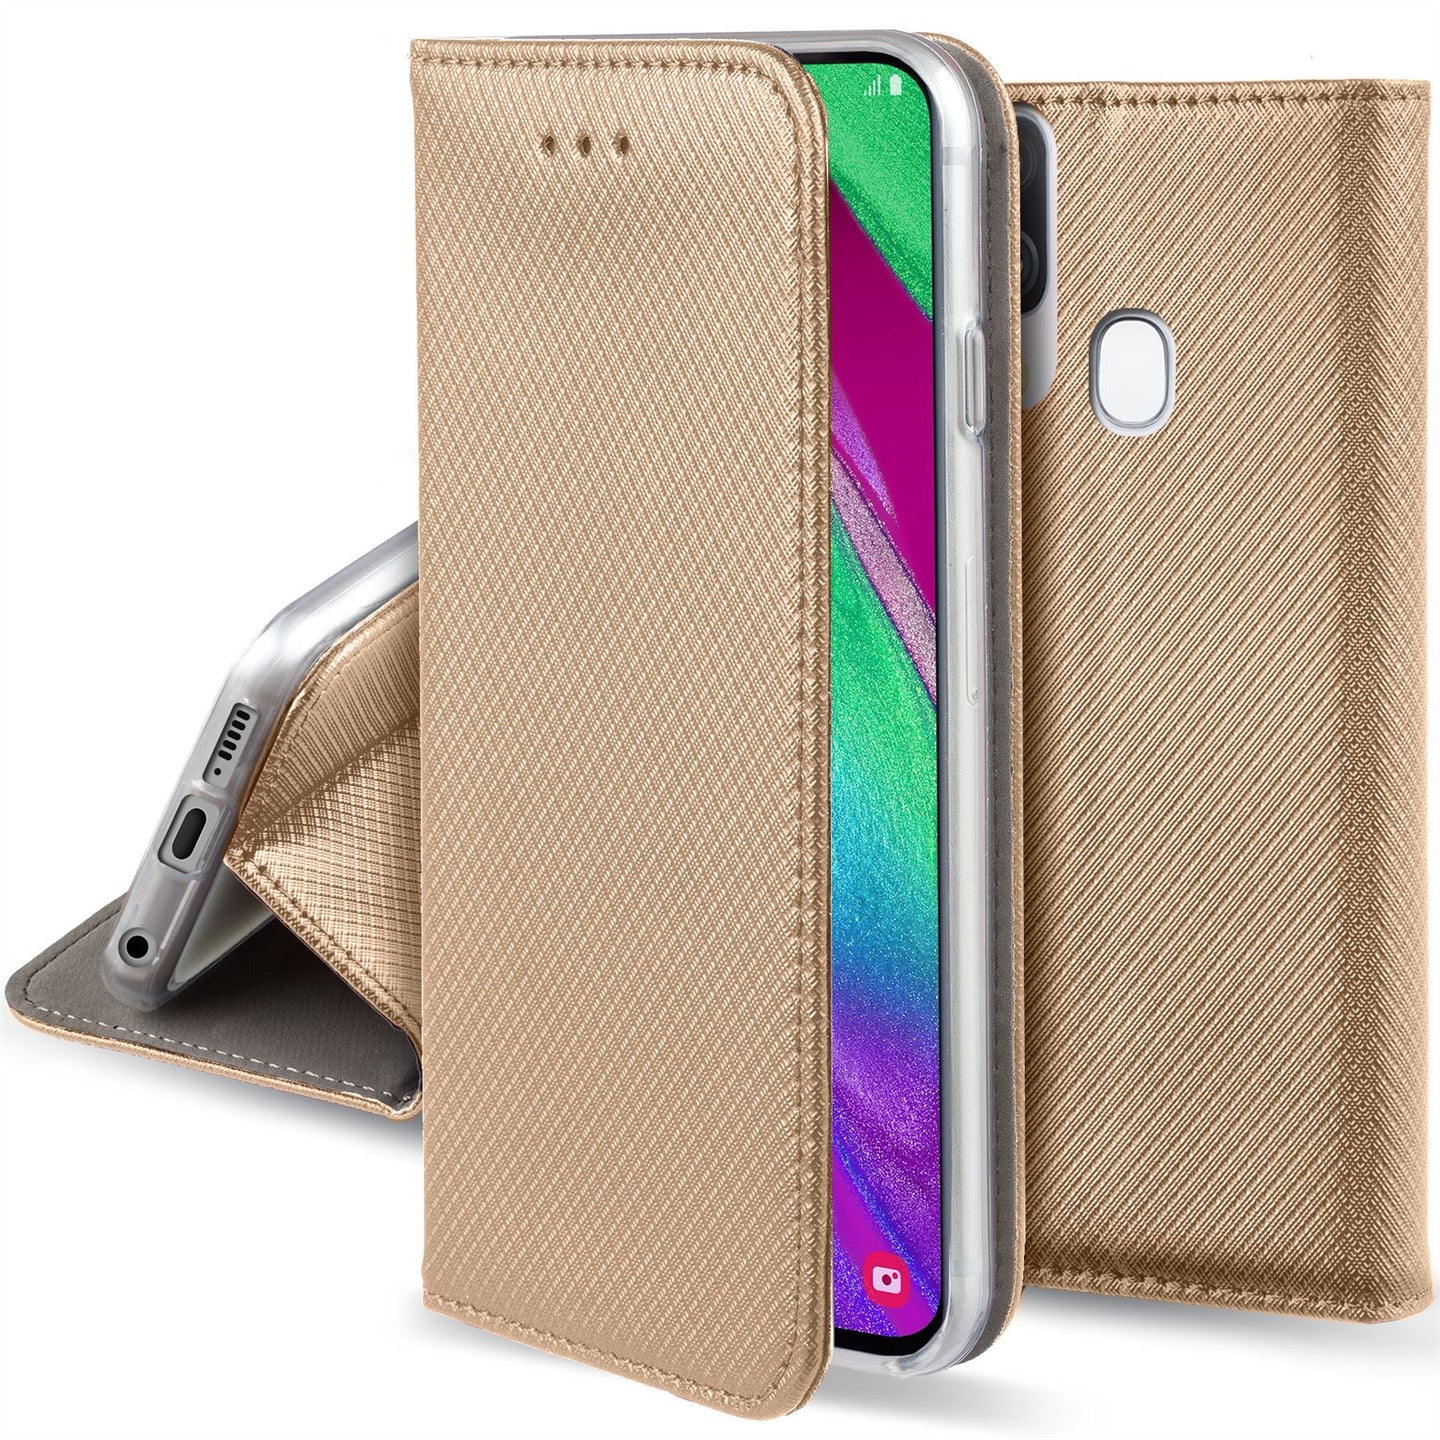 Moozy Case Flip Cover for Samsung A40, Gold - Smart Magnetic Flip Case with Card Holder and Stand